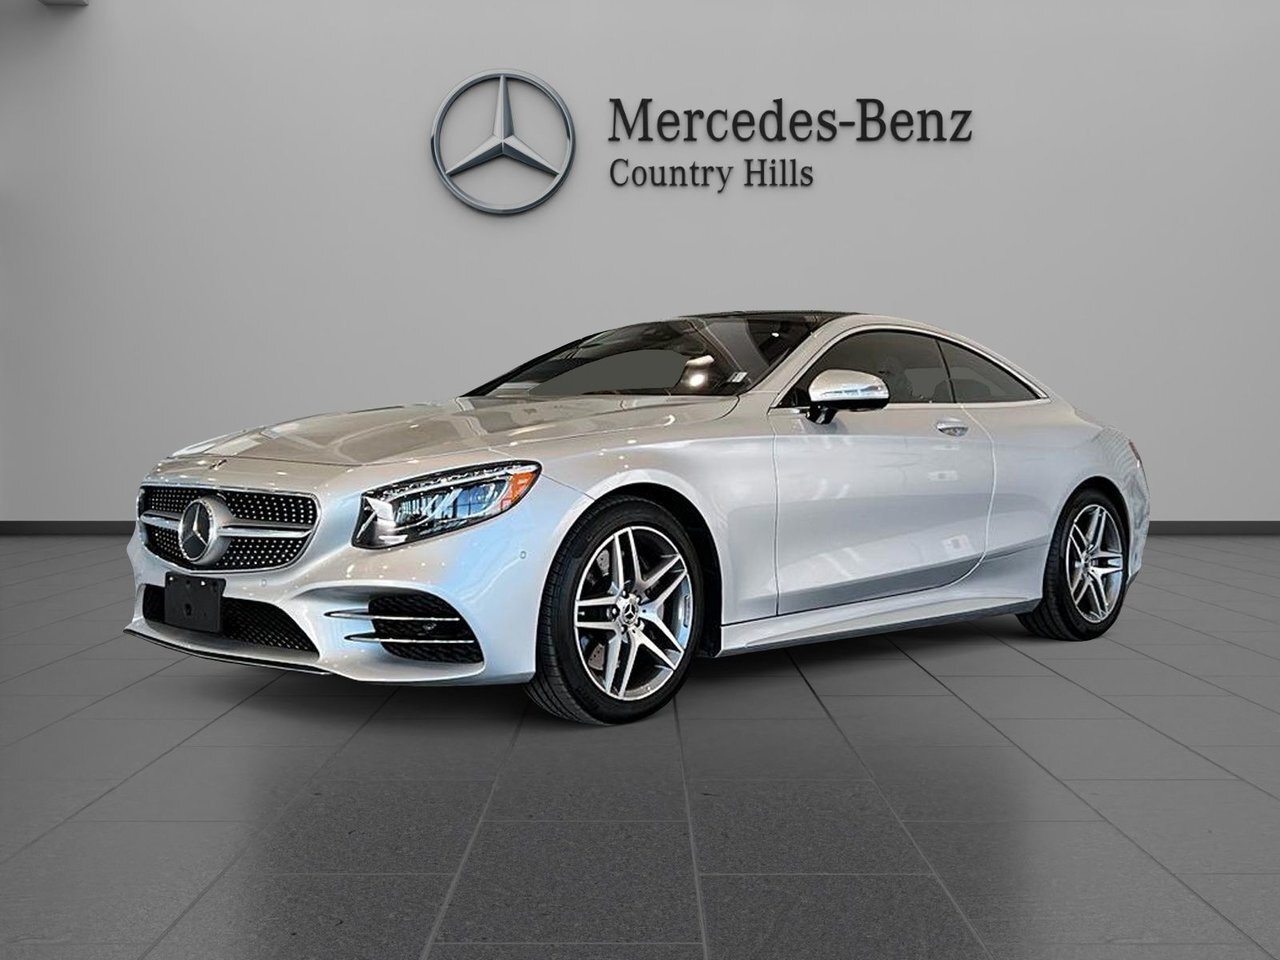 2020 Mercedes-Benz S560 4MATIC Coupe Only 7,000 km's! $168,730 new!